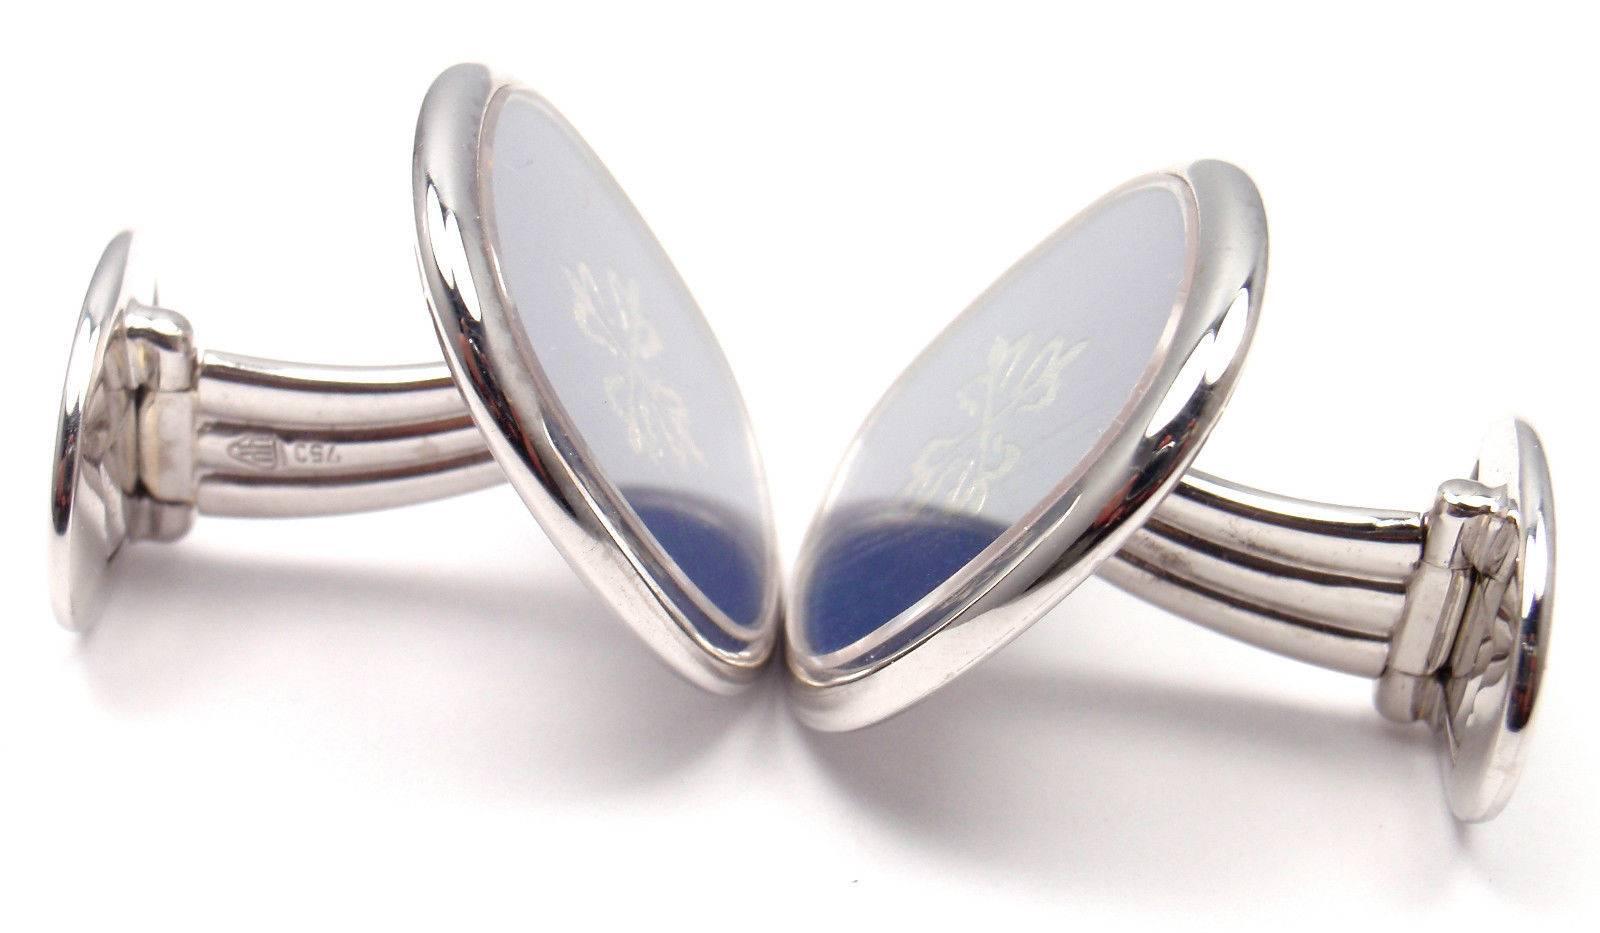 18k White Gold Ellipse Calatrava Blue Enamel Large Cufflinks by Patek Philippe. 

Details: 
Measurements: 22mm x 20mm x 21mm
Weight: 28.8 grams 
Stamped Hallmarks: Patek Philippe 750 Geneve 90033135 

*Free Shipping within the United States* 